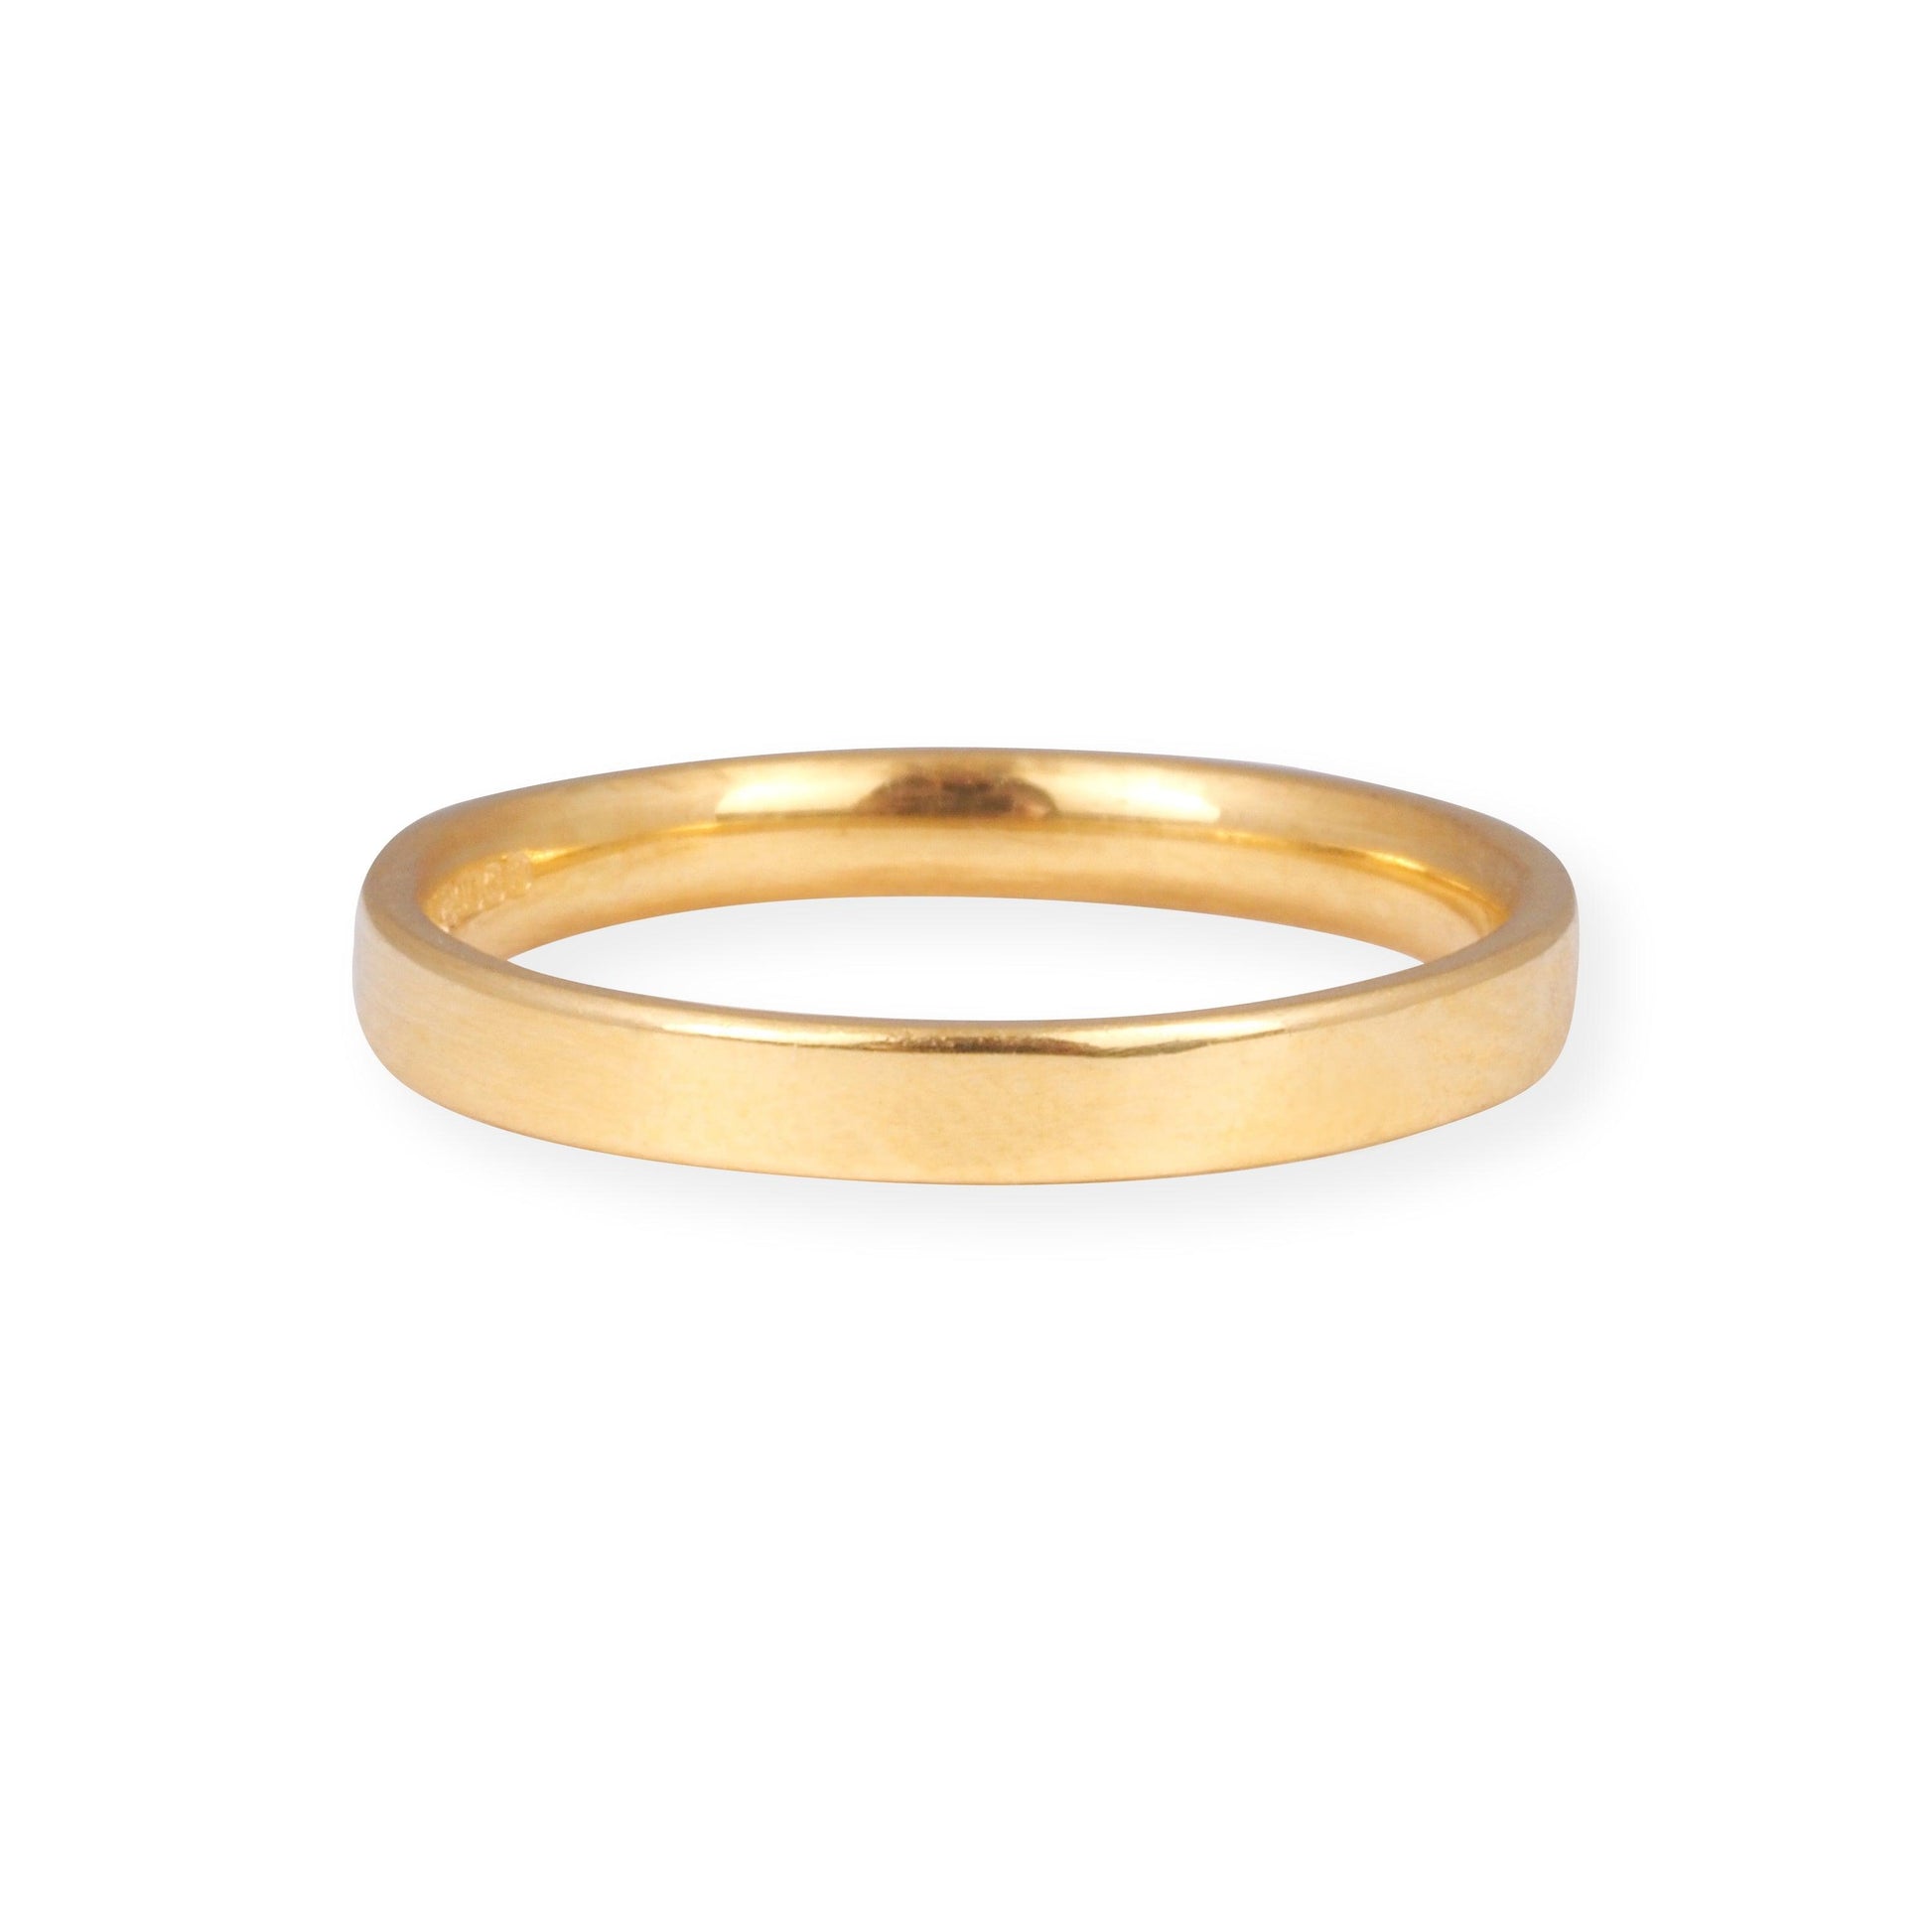 22ct Yellow Gold Band 2.25mm BD-3 - Minar Jewellers